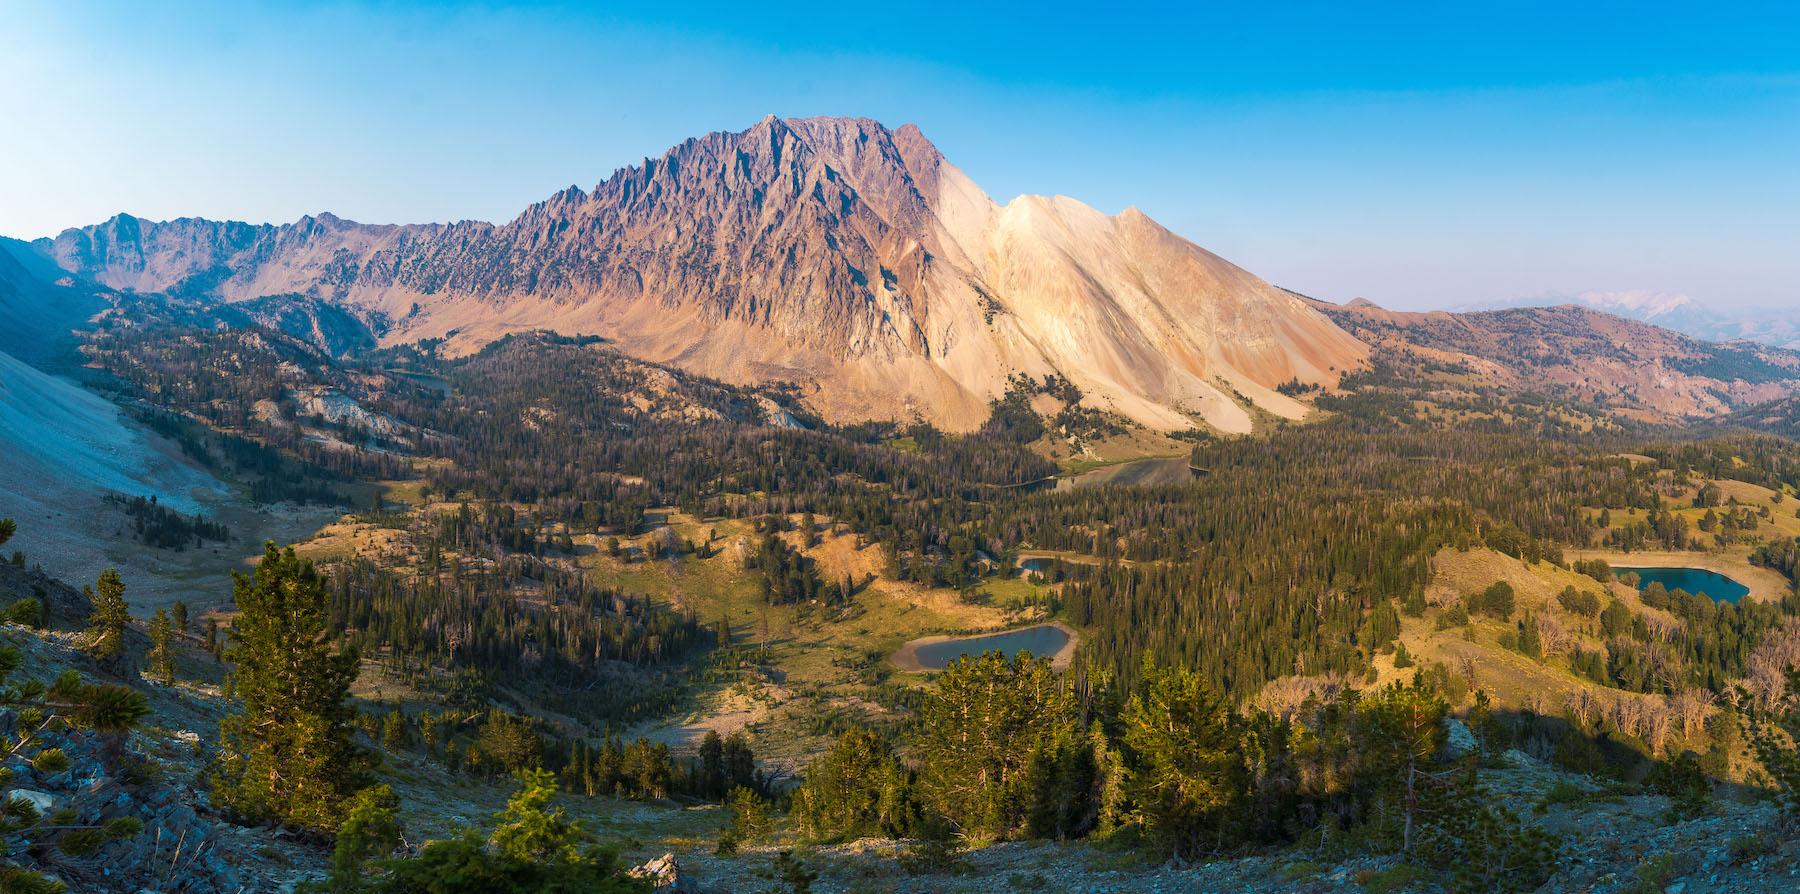 Castle Peak and the Chamberlain Basin in Idaho's White Clouds Mountains